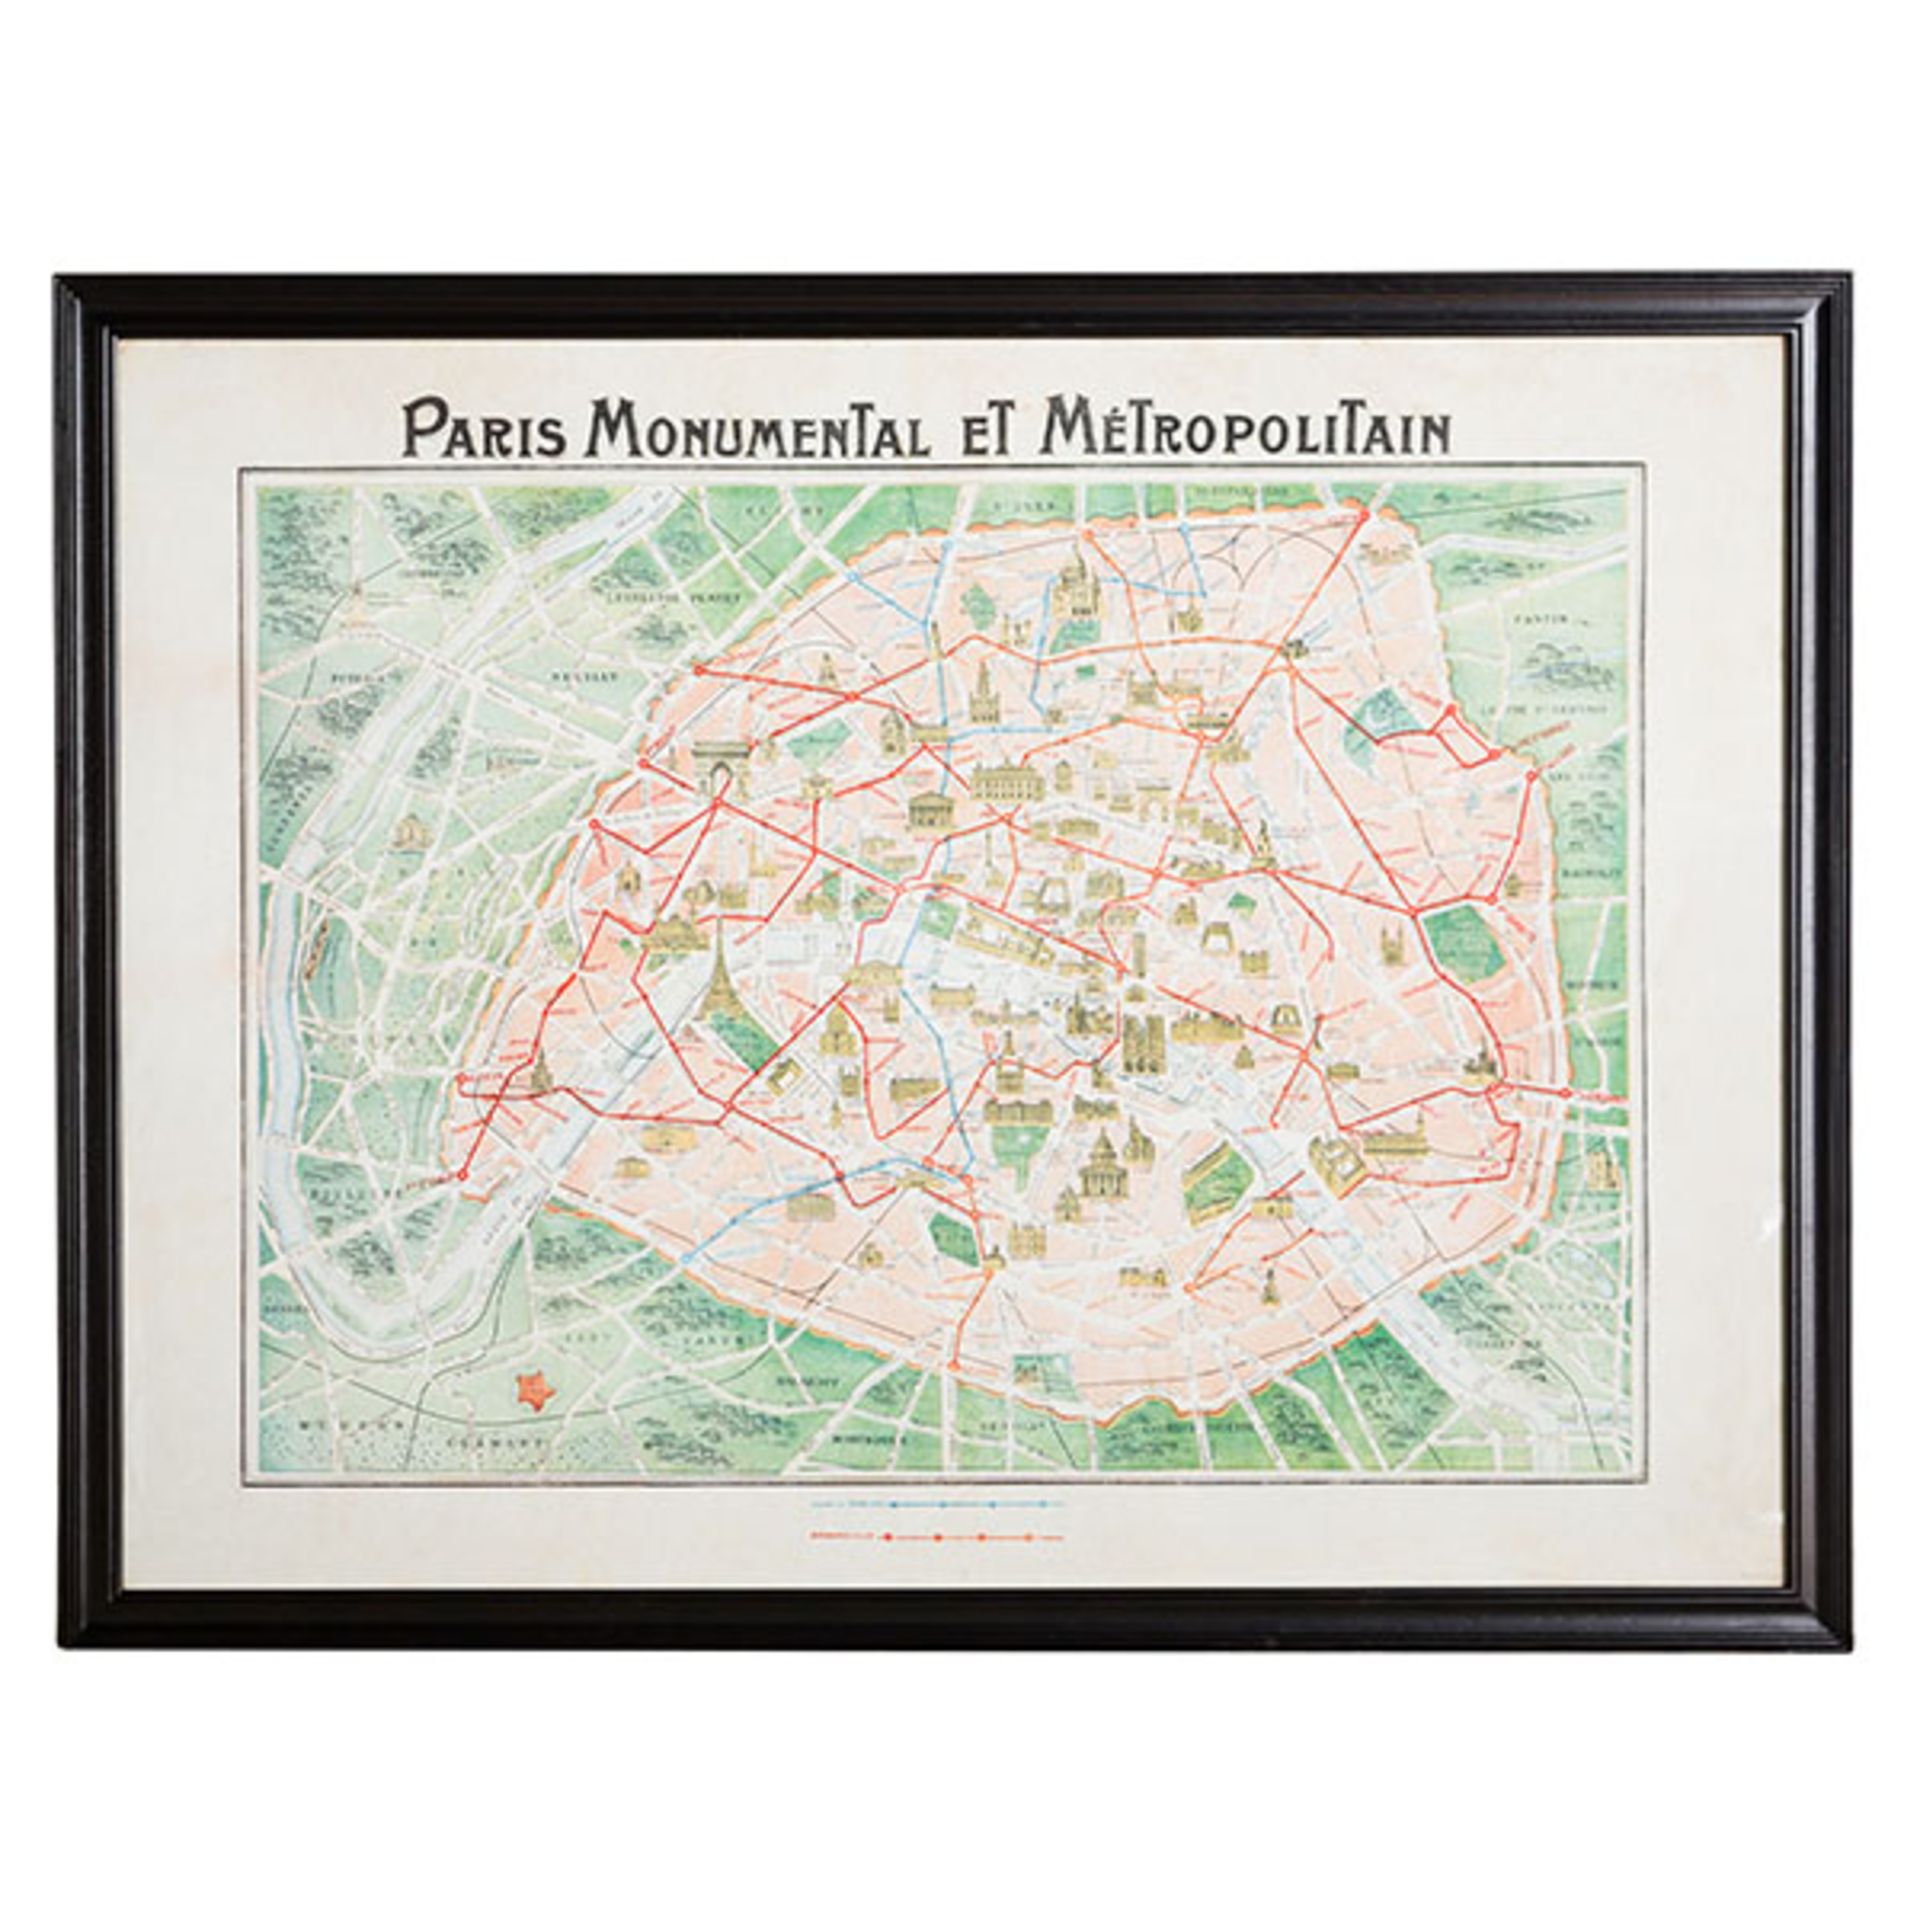 Capital Map Paris These Unframed City Maps Pay Homage To Each City's History And The Life Stories - Image 2 of 2